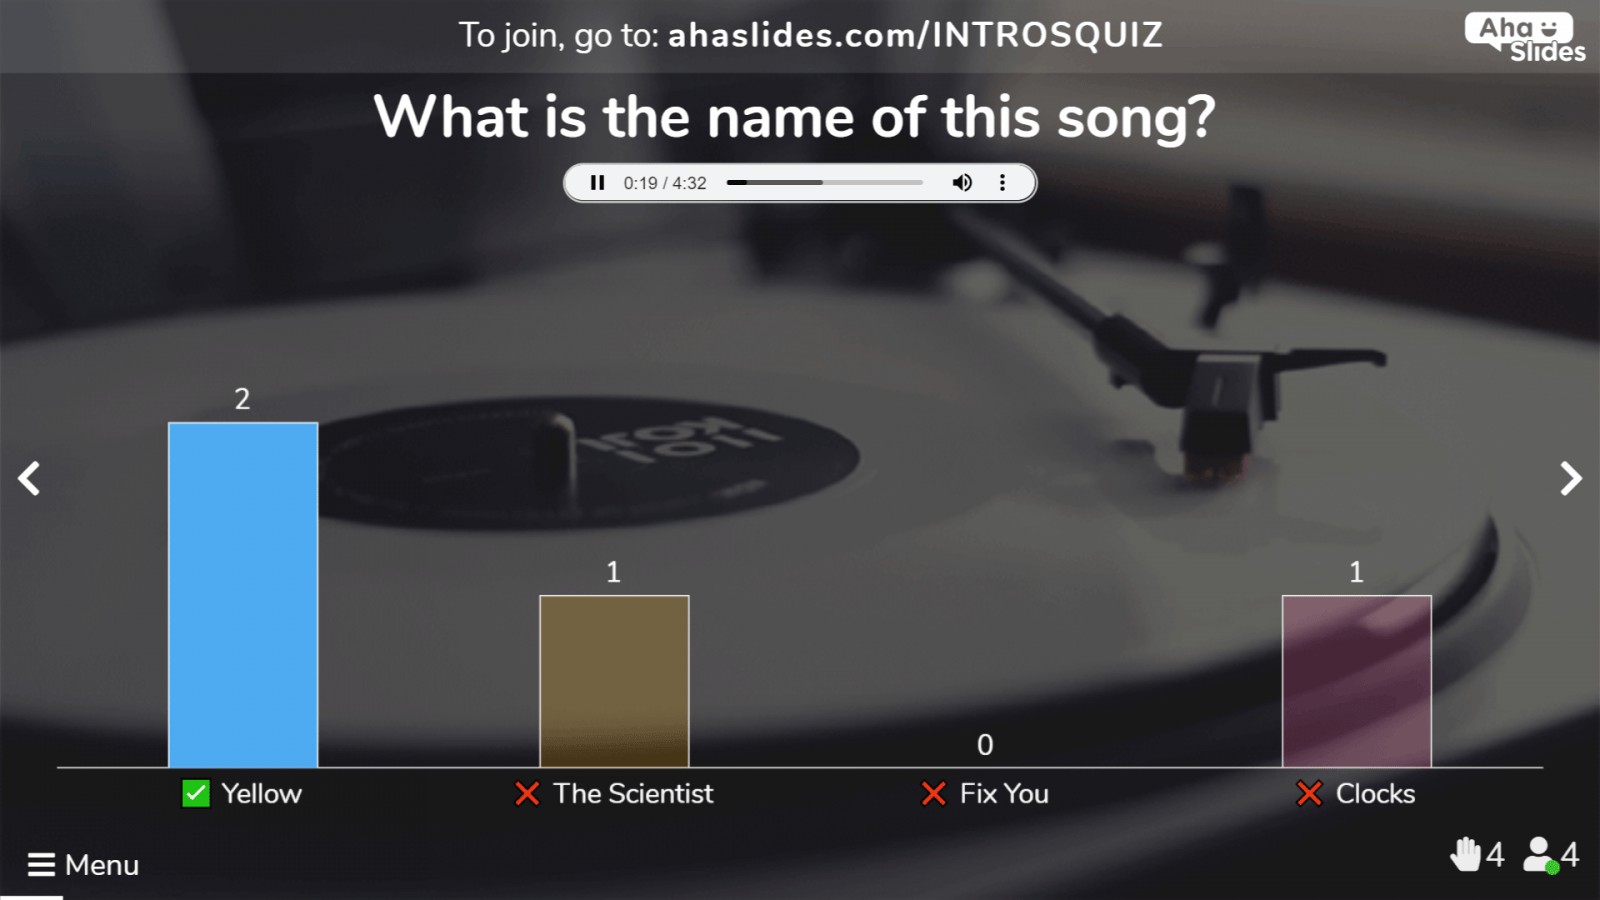 125 Questions And Answers For A Pop Music Quiz In 21 Premade Quiz Free Software Ahaslides